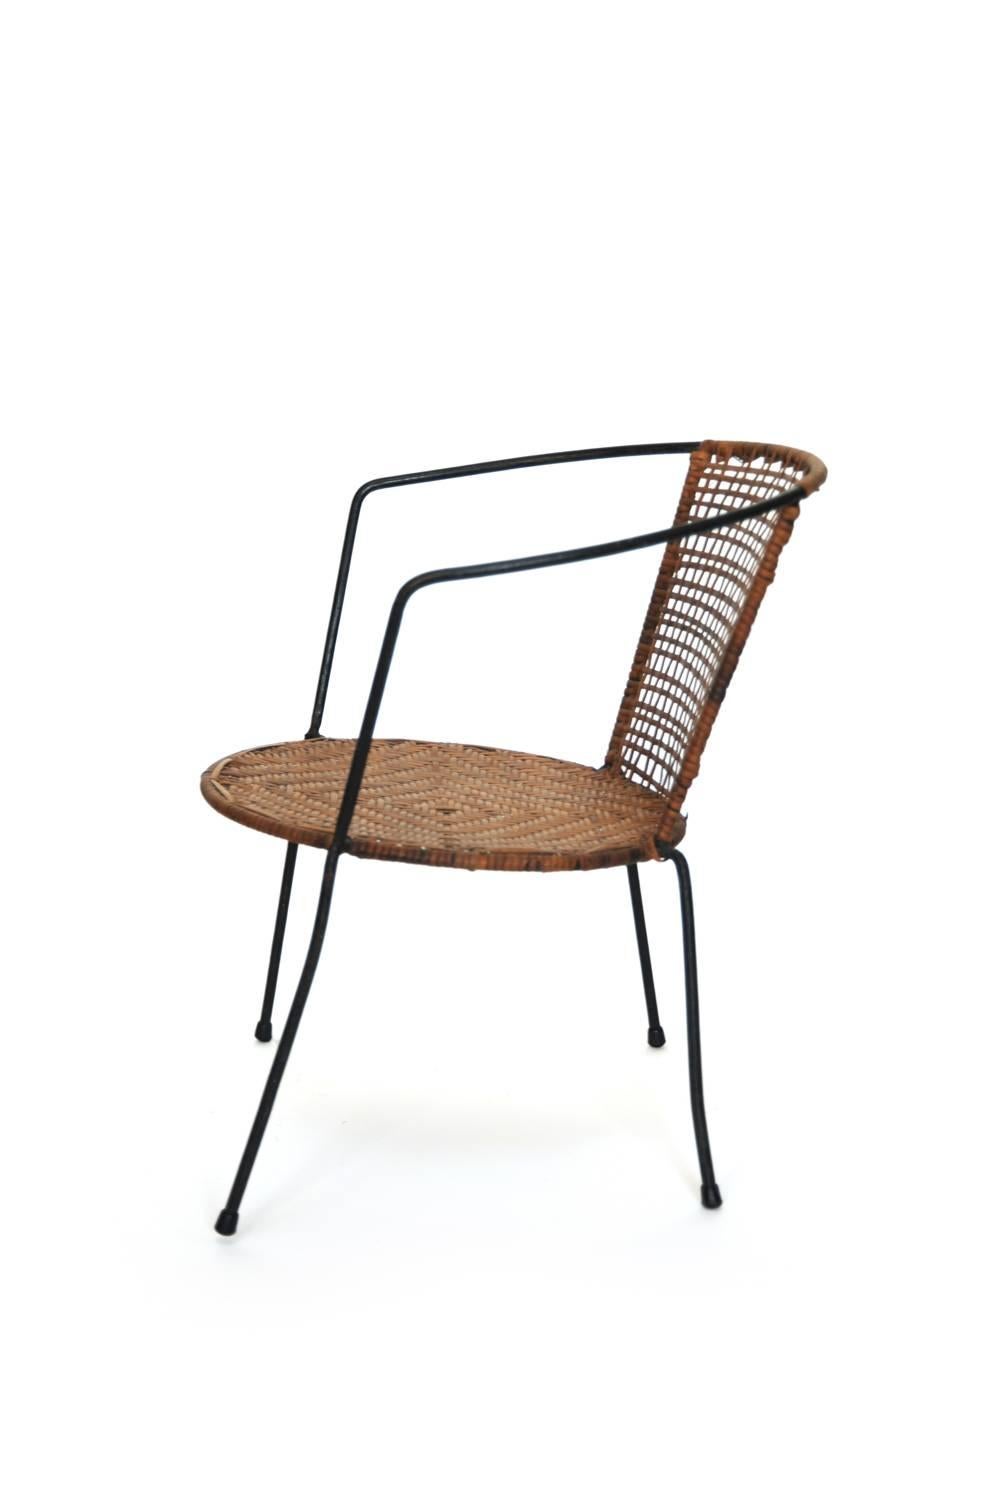 Curved Geometric Rattan Child Chair with Iron Legs, USA, 1950s

Vintage, USA, 1950s
Rattan and Iron
H 17 in, W 16.25 in, D 12 in (seat: H 9.25 in)

From a private child chair collection